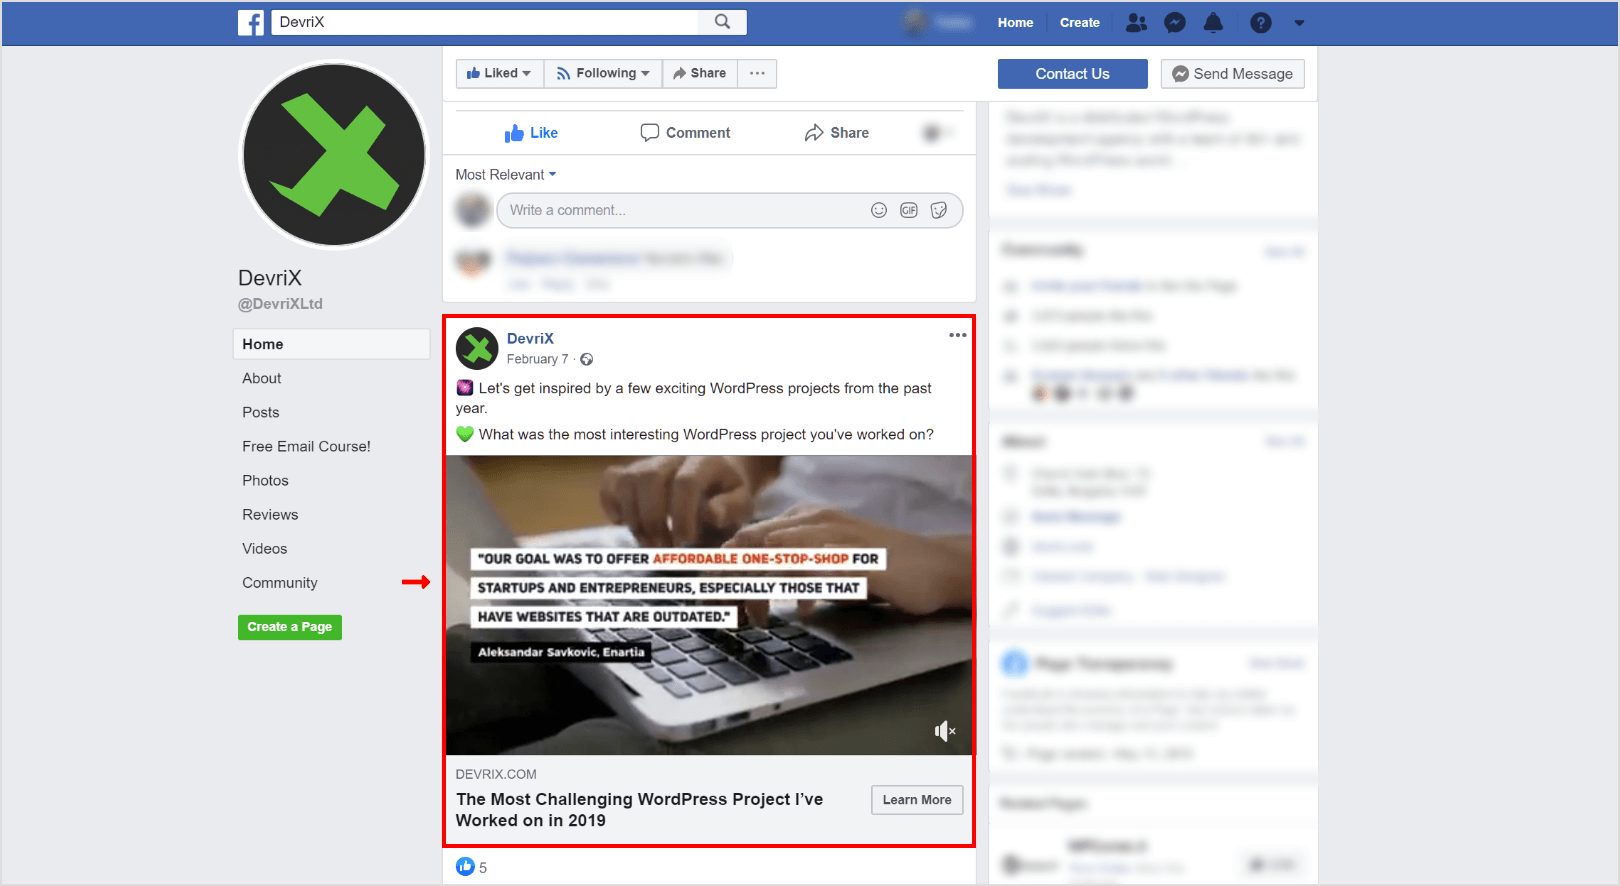 Screenshot showing a Facebook post by DevriX with a video titled 'The Most Challenging WordPress Project I've Worked on in 2019'. The post suggests leveraging video content for marketing and includes a call to action to learn more about the project, highlighting the effectiveness of video in engaging the audience and driving website traffic. Visible engagement options such as likes, comments, and shares are displayed.